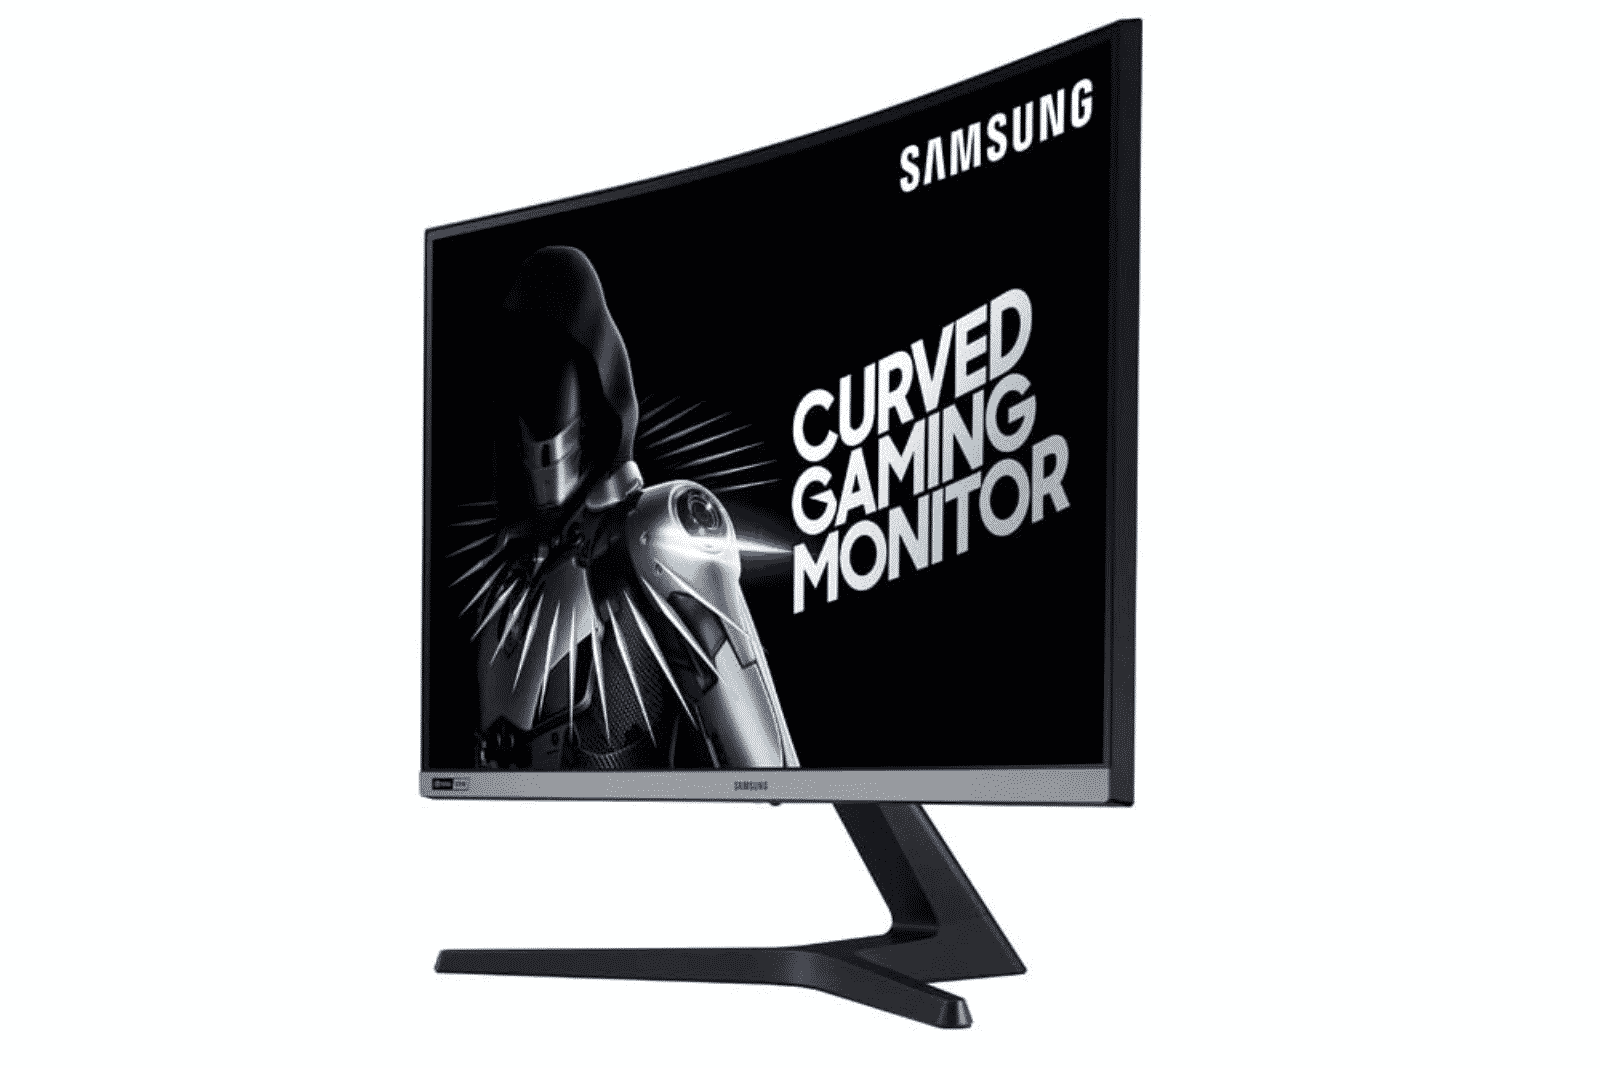 Samsung 27 inch Curved Gaming Monitor